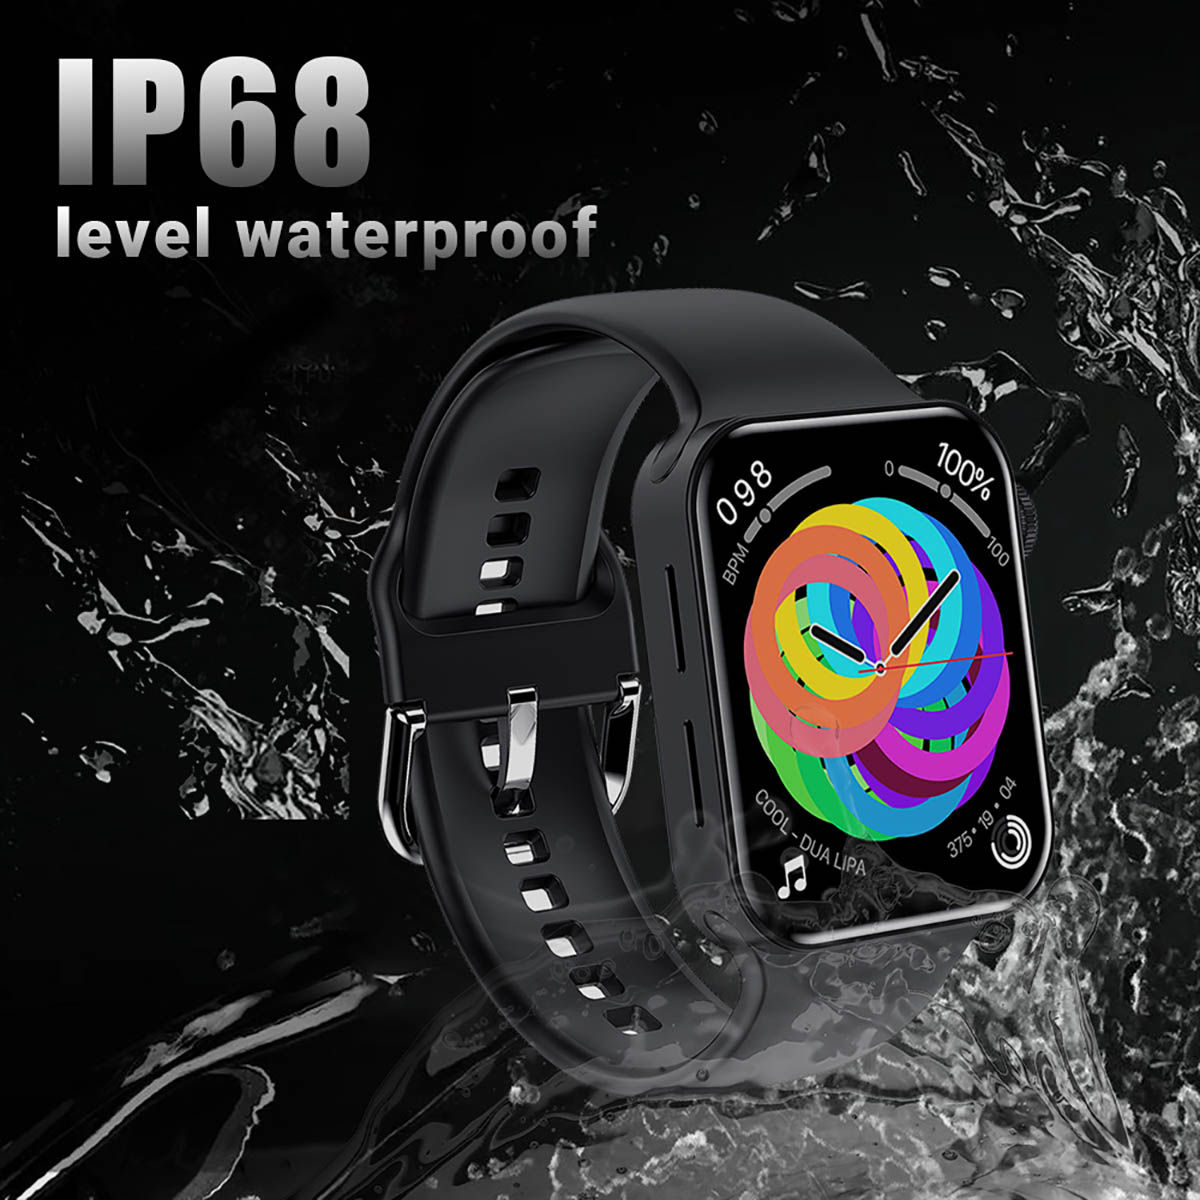 I KALL W5 1.68 Inch Display Smart Watch with BT Calling, SPO2 and Multiple Sports Modes (Black)